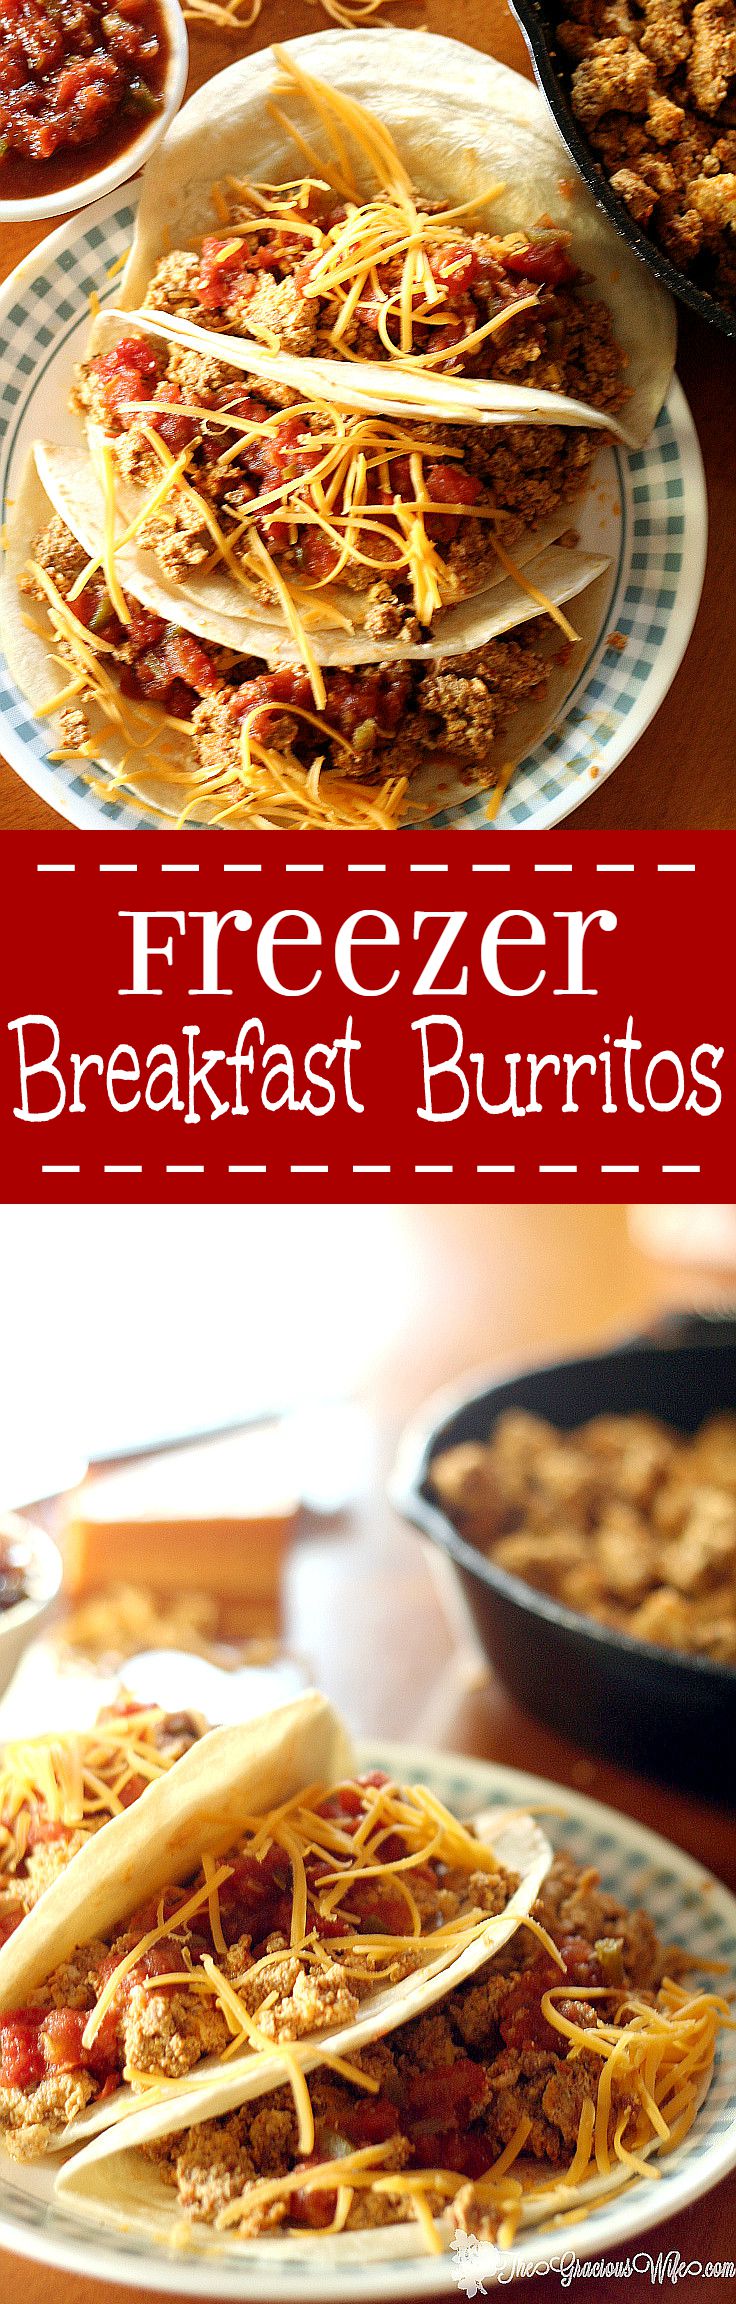 Freezer Breakfast Burritos Recipe - a quick and easy breakfast recipe idea that you can make ahead AND freeze.  Eggs, spicy chorizo, and toppings like salsa or pico de gallo.  One of our breakfast favorites!